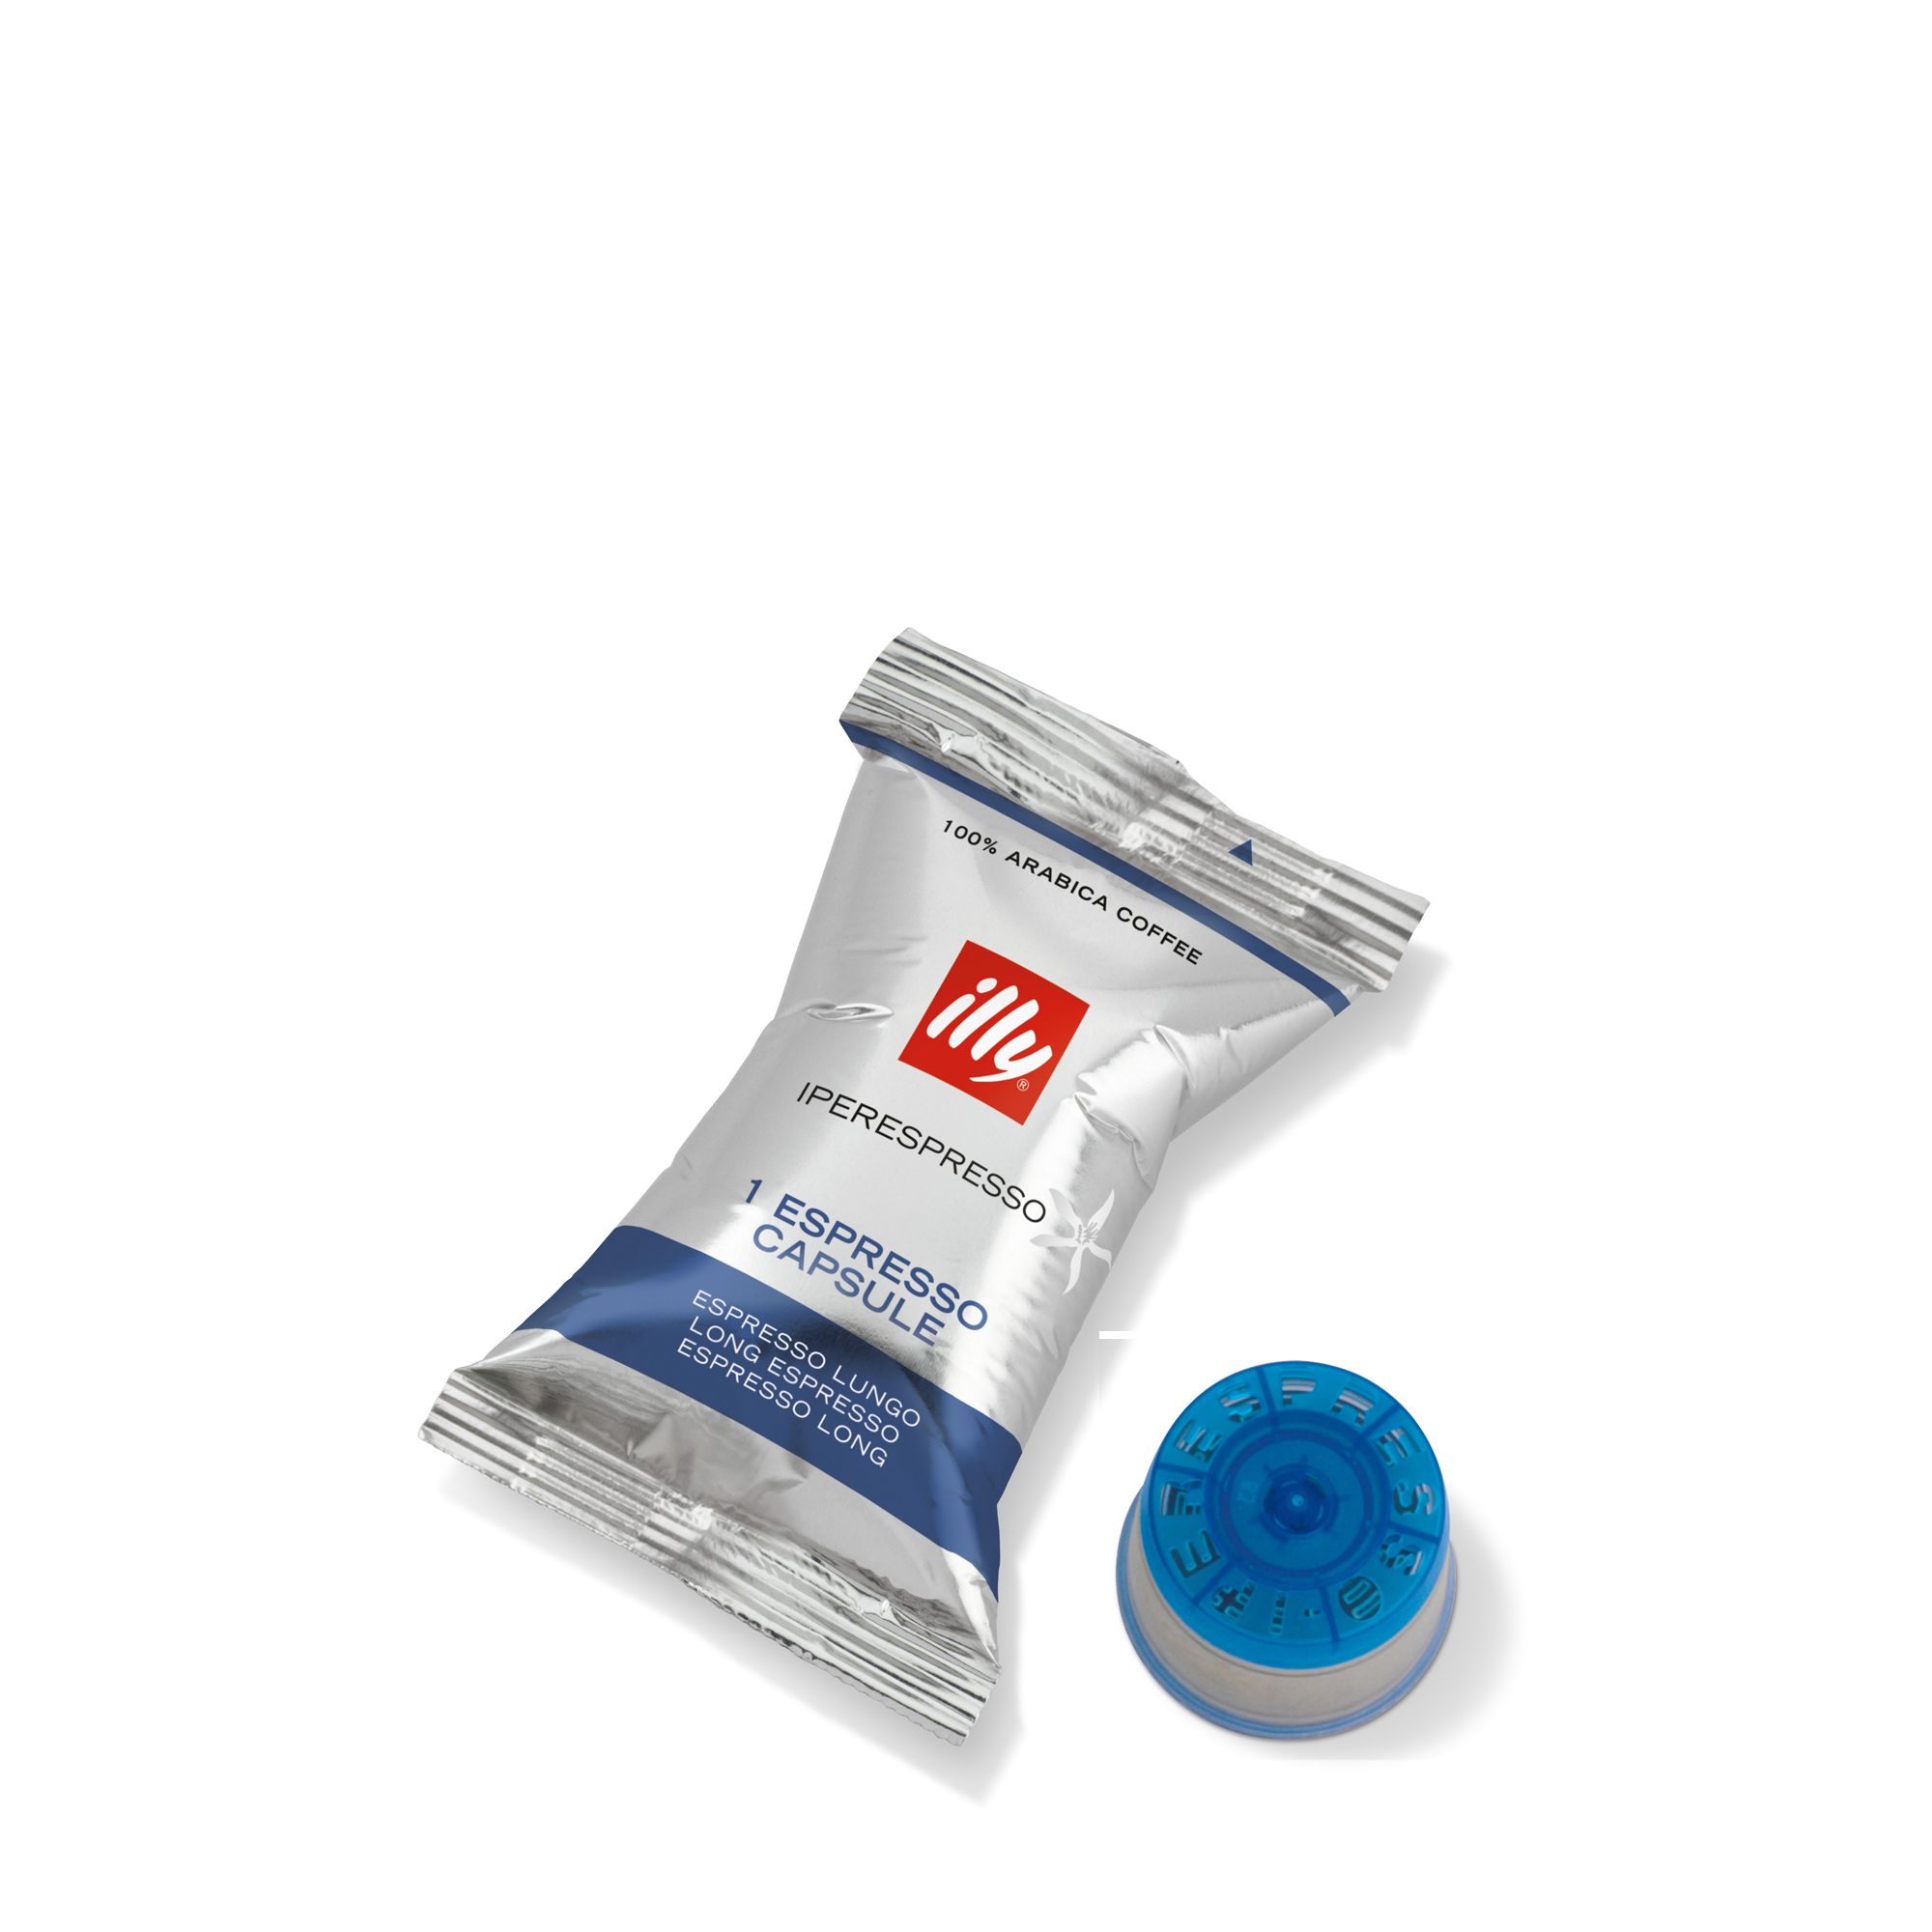 illy iperEspresso Capsule Singles Lungo - 100 Individually Wrapped Capsules